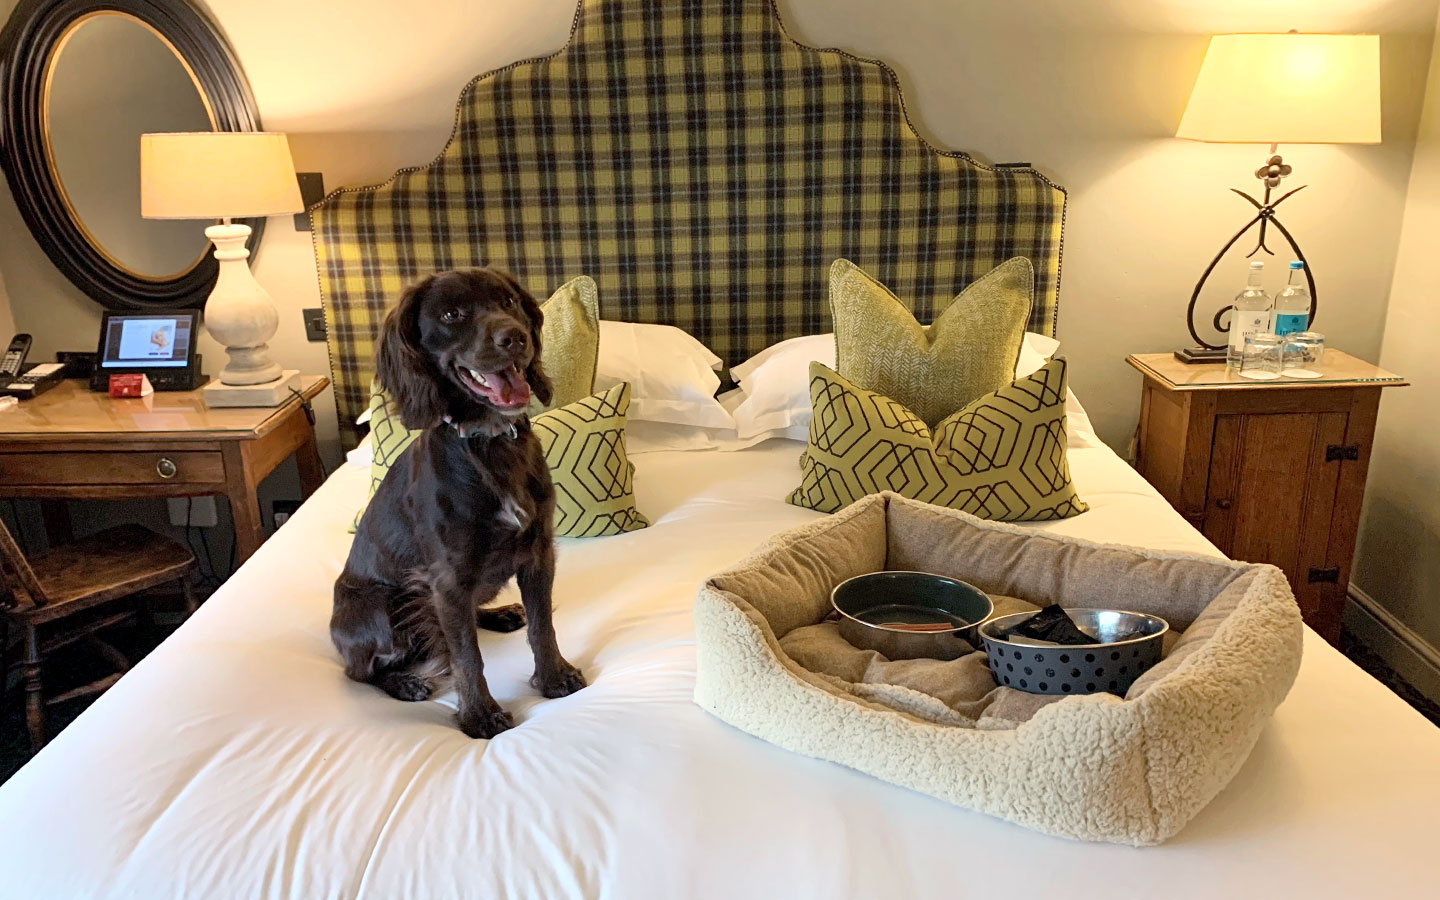 A pet-friendly stay at the Lygon Arms hotel in Broadway, Cotswolds